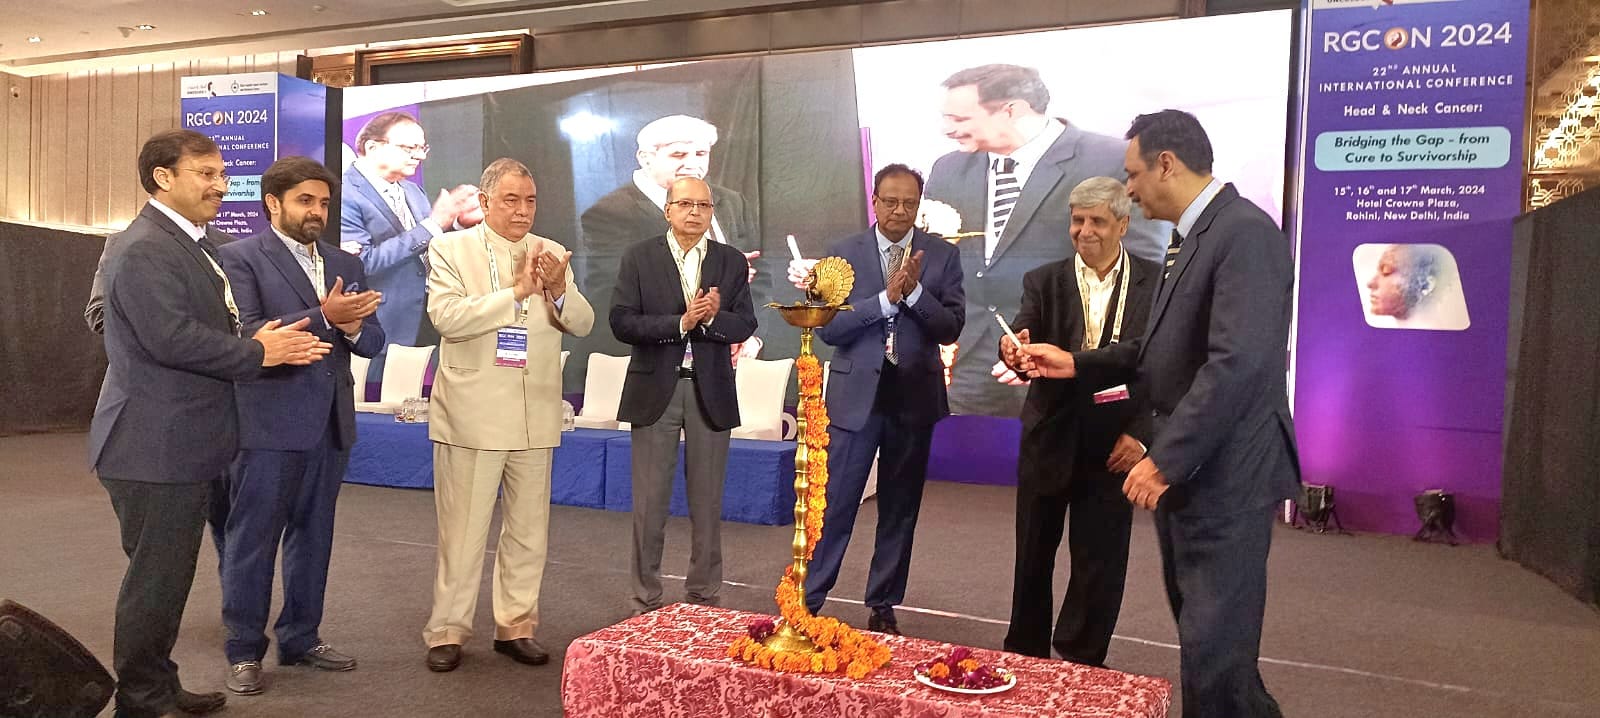 National Cancer Institute Chief Alok Takkar lightening at RGCON 2024 he lamp at 